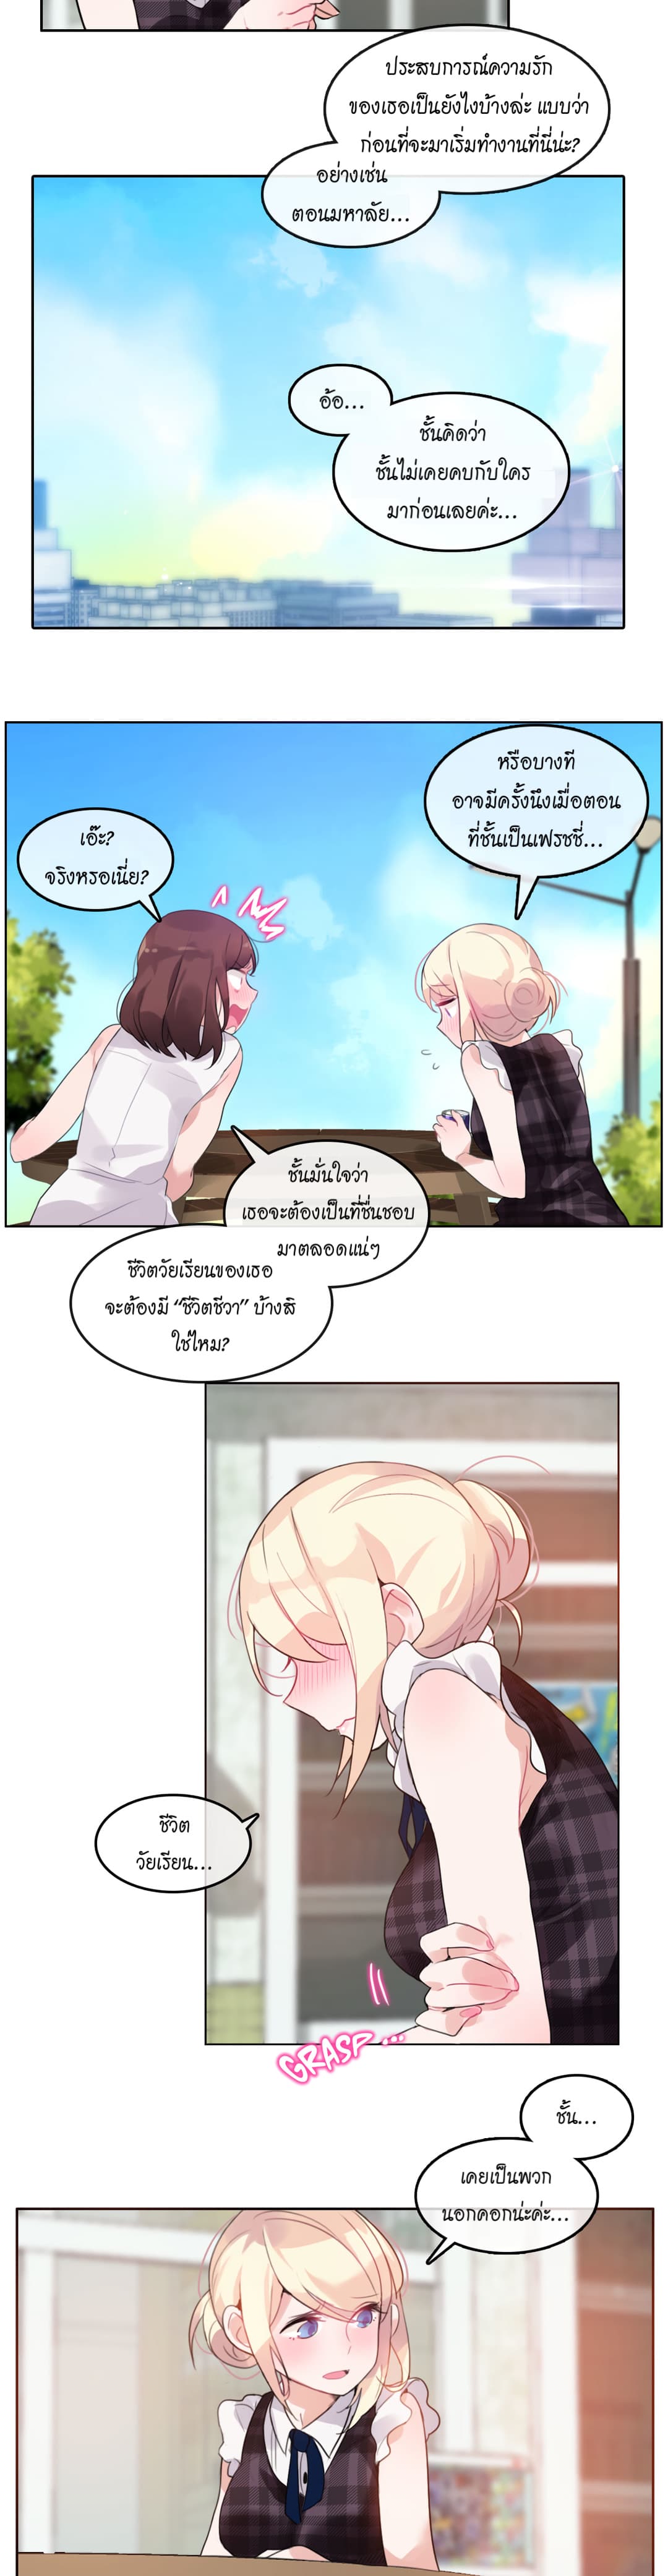 A Pervert’s Daily Life 18 (11)